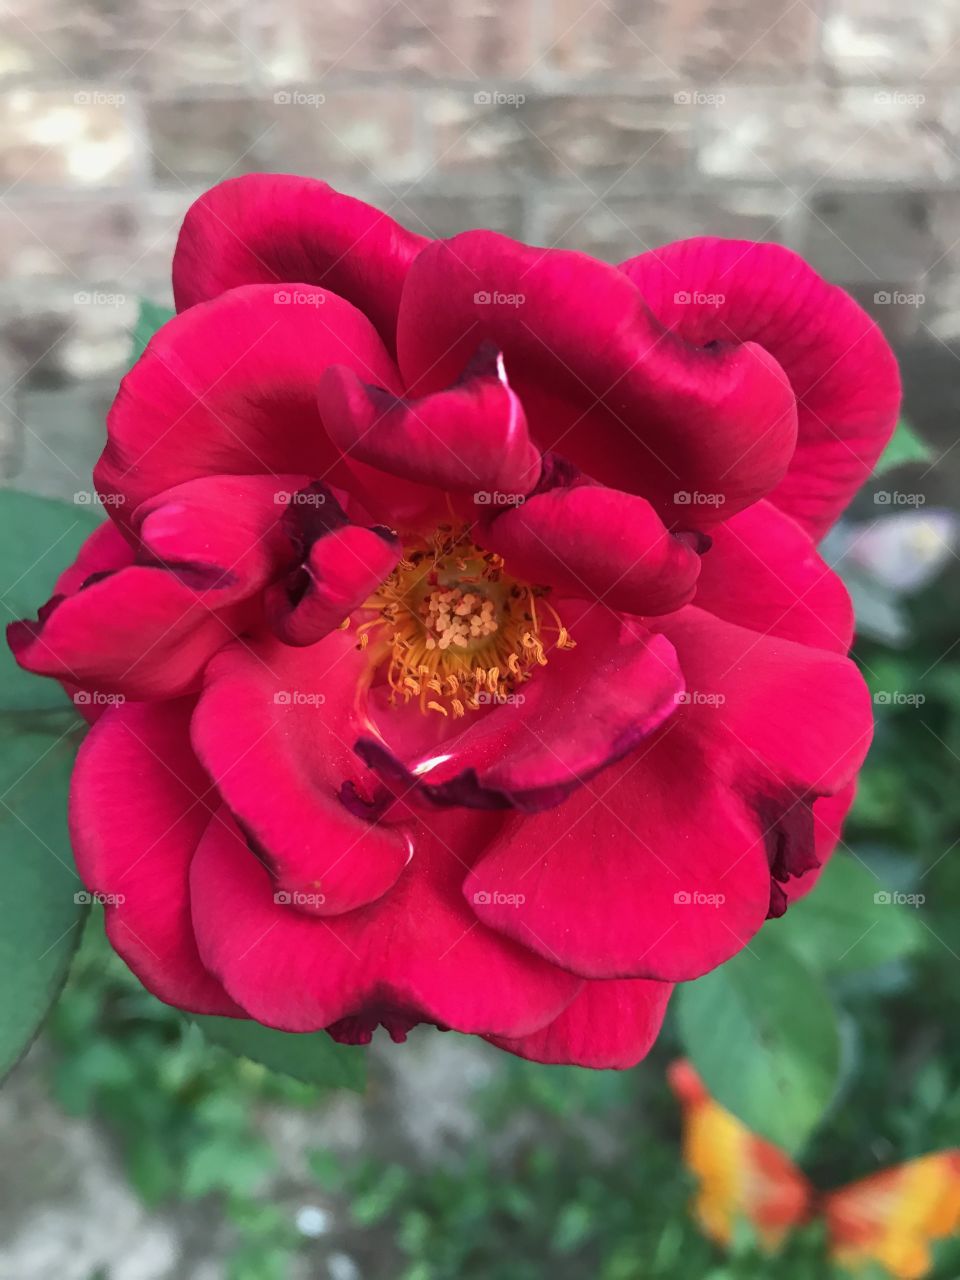 my first rose 